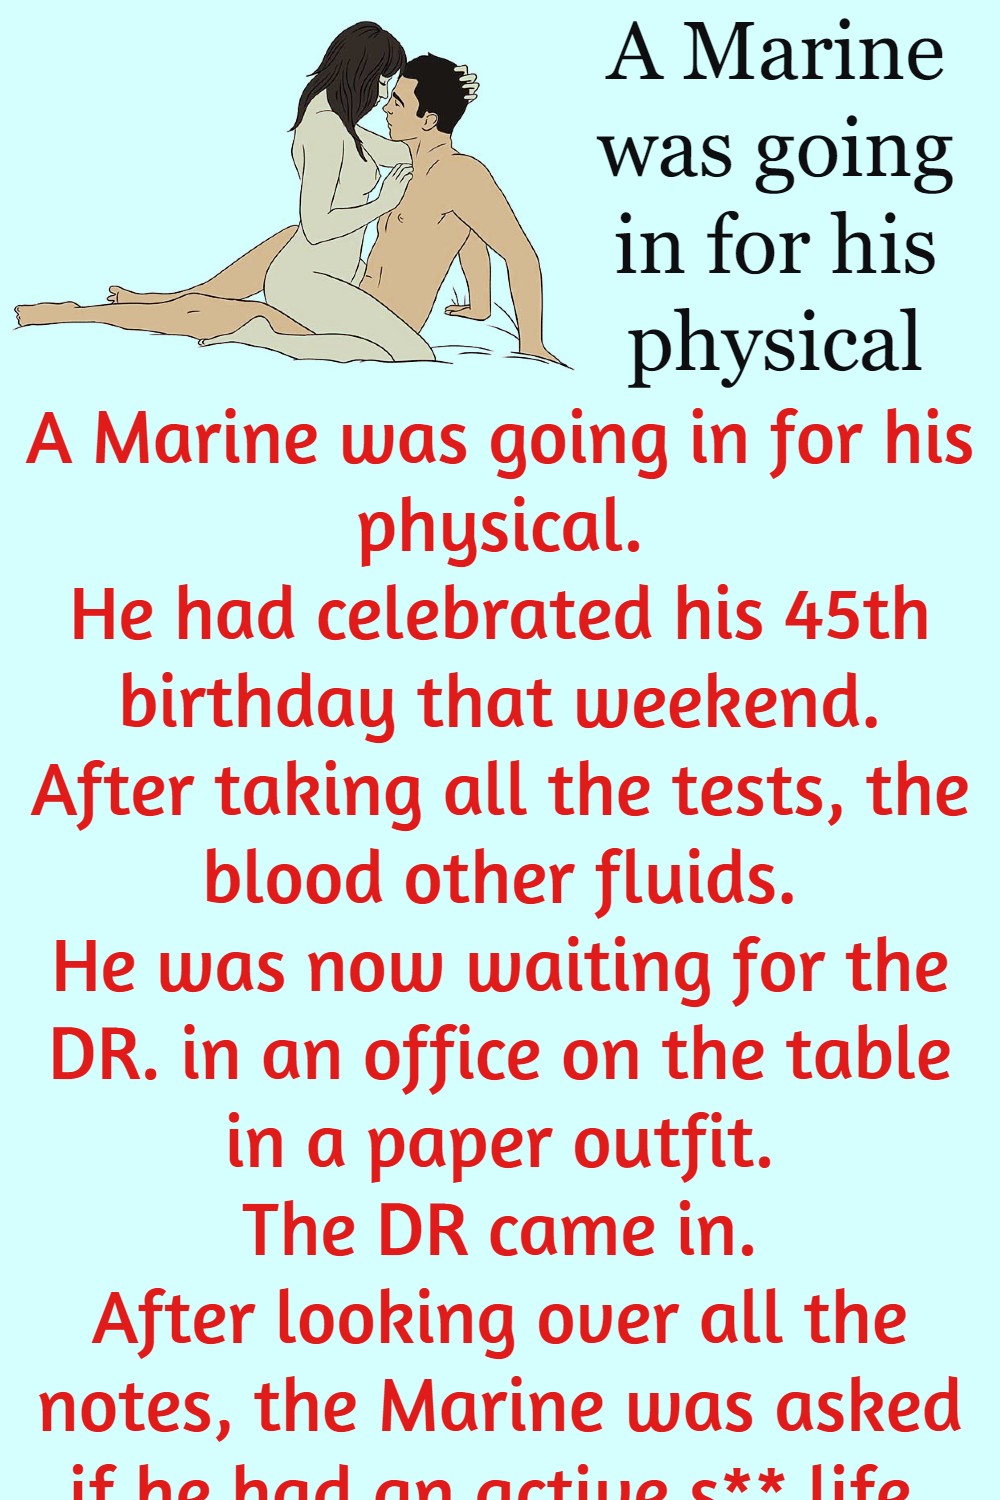 A Marine was going in for his physical